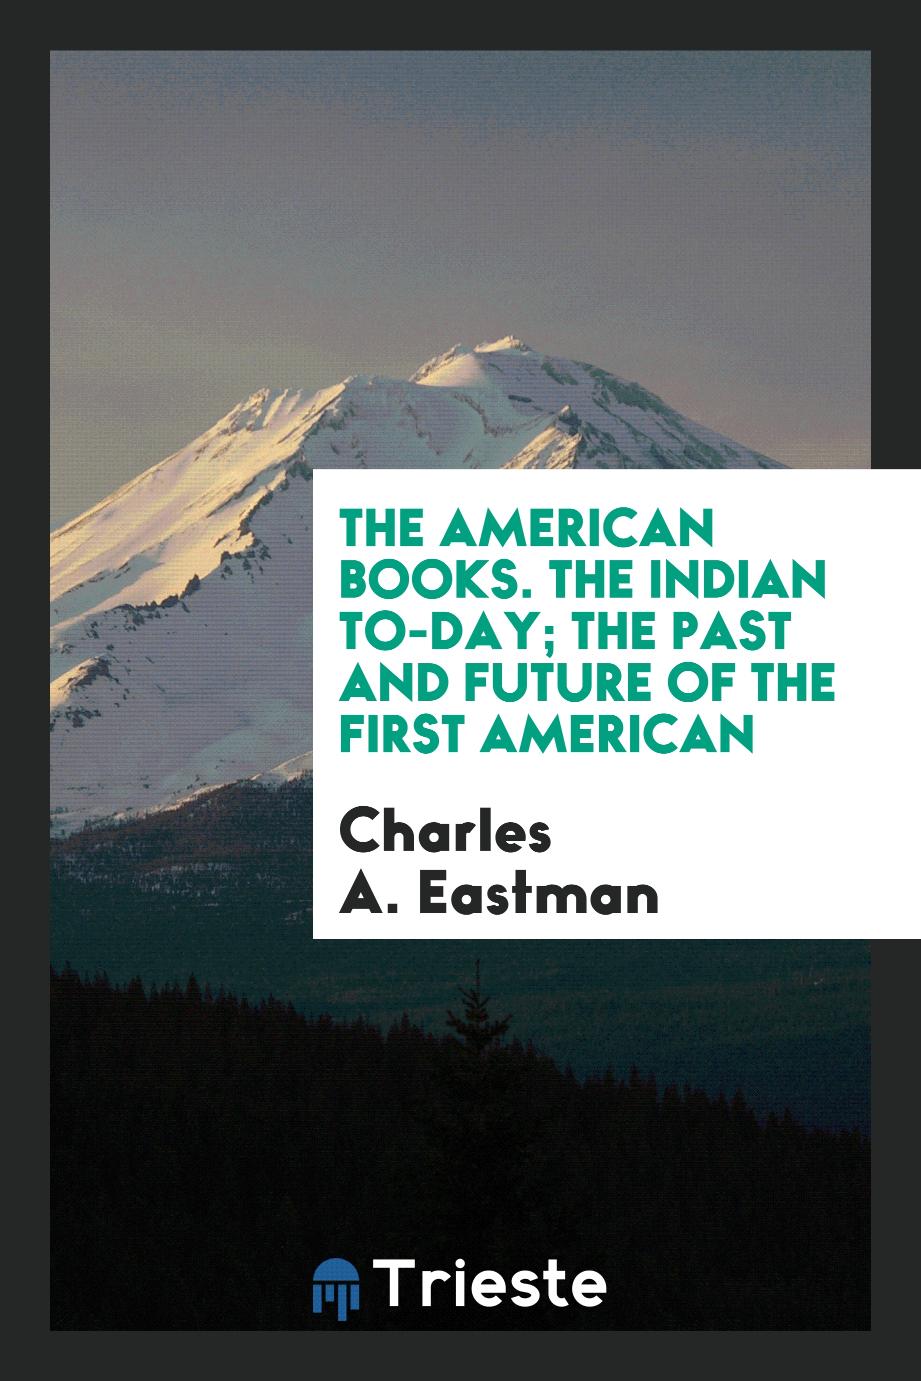 The American Books. The Indian to-day; the past and future of the first American